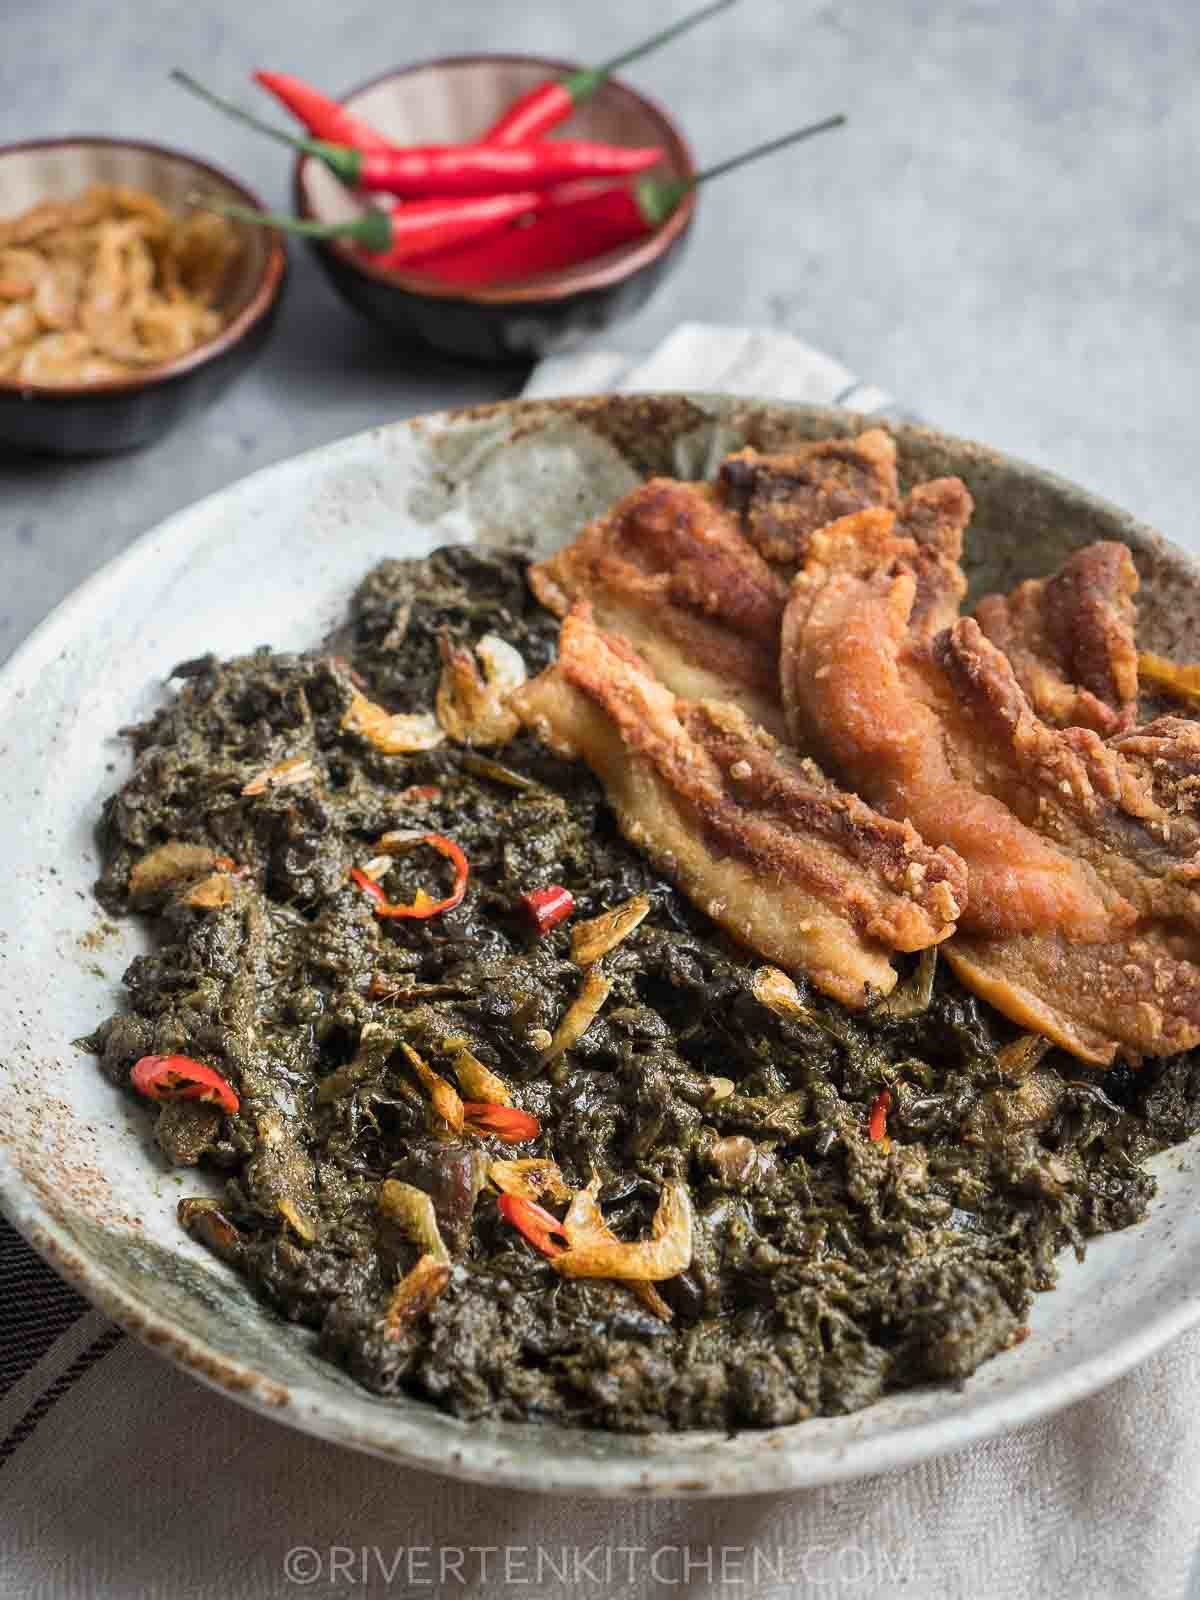 Laing with Chilies, dried shrimp and pork